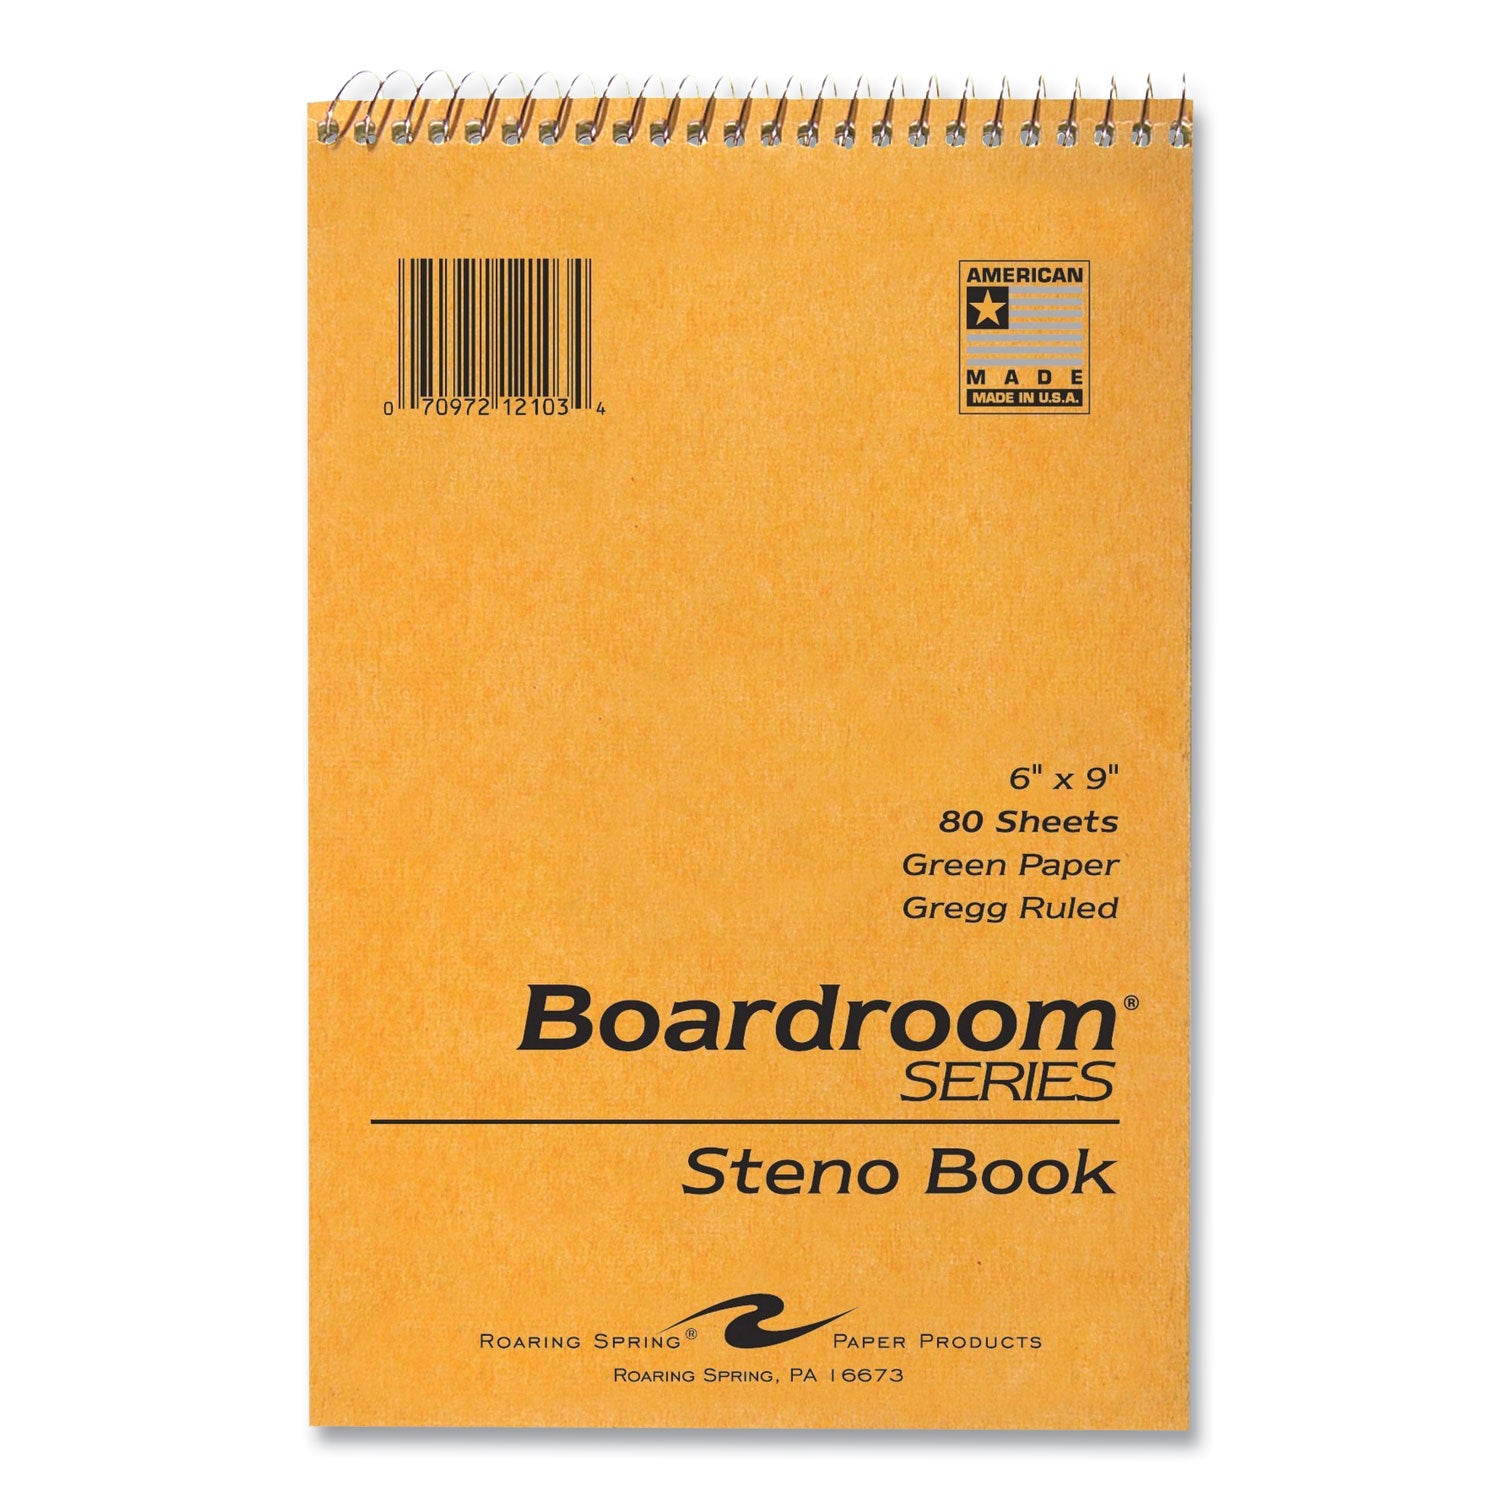 boardroom-series-steno-pad-gregg-ruled-brown-cover-80-green-6-x-9-sheets-72-pads-carton-ships-in-4-6-business-days_roa12103cs - 1